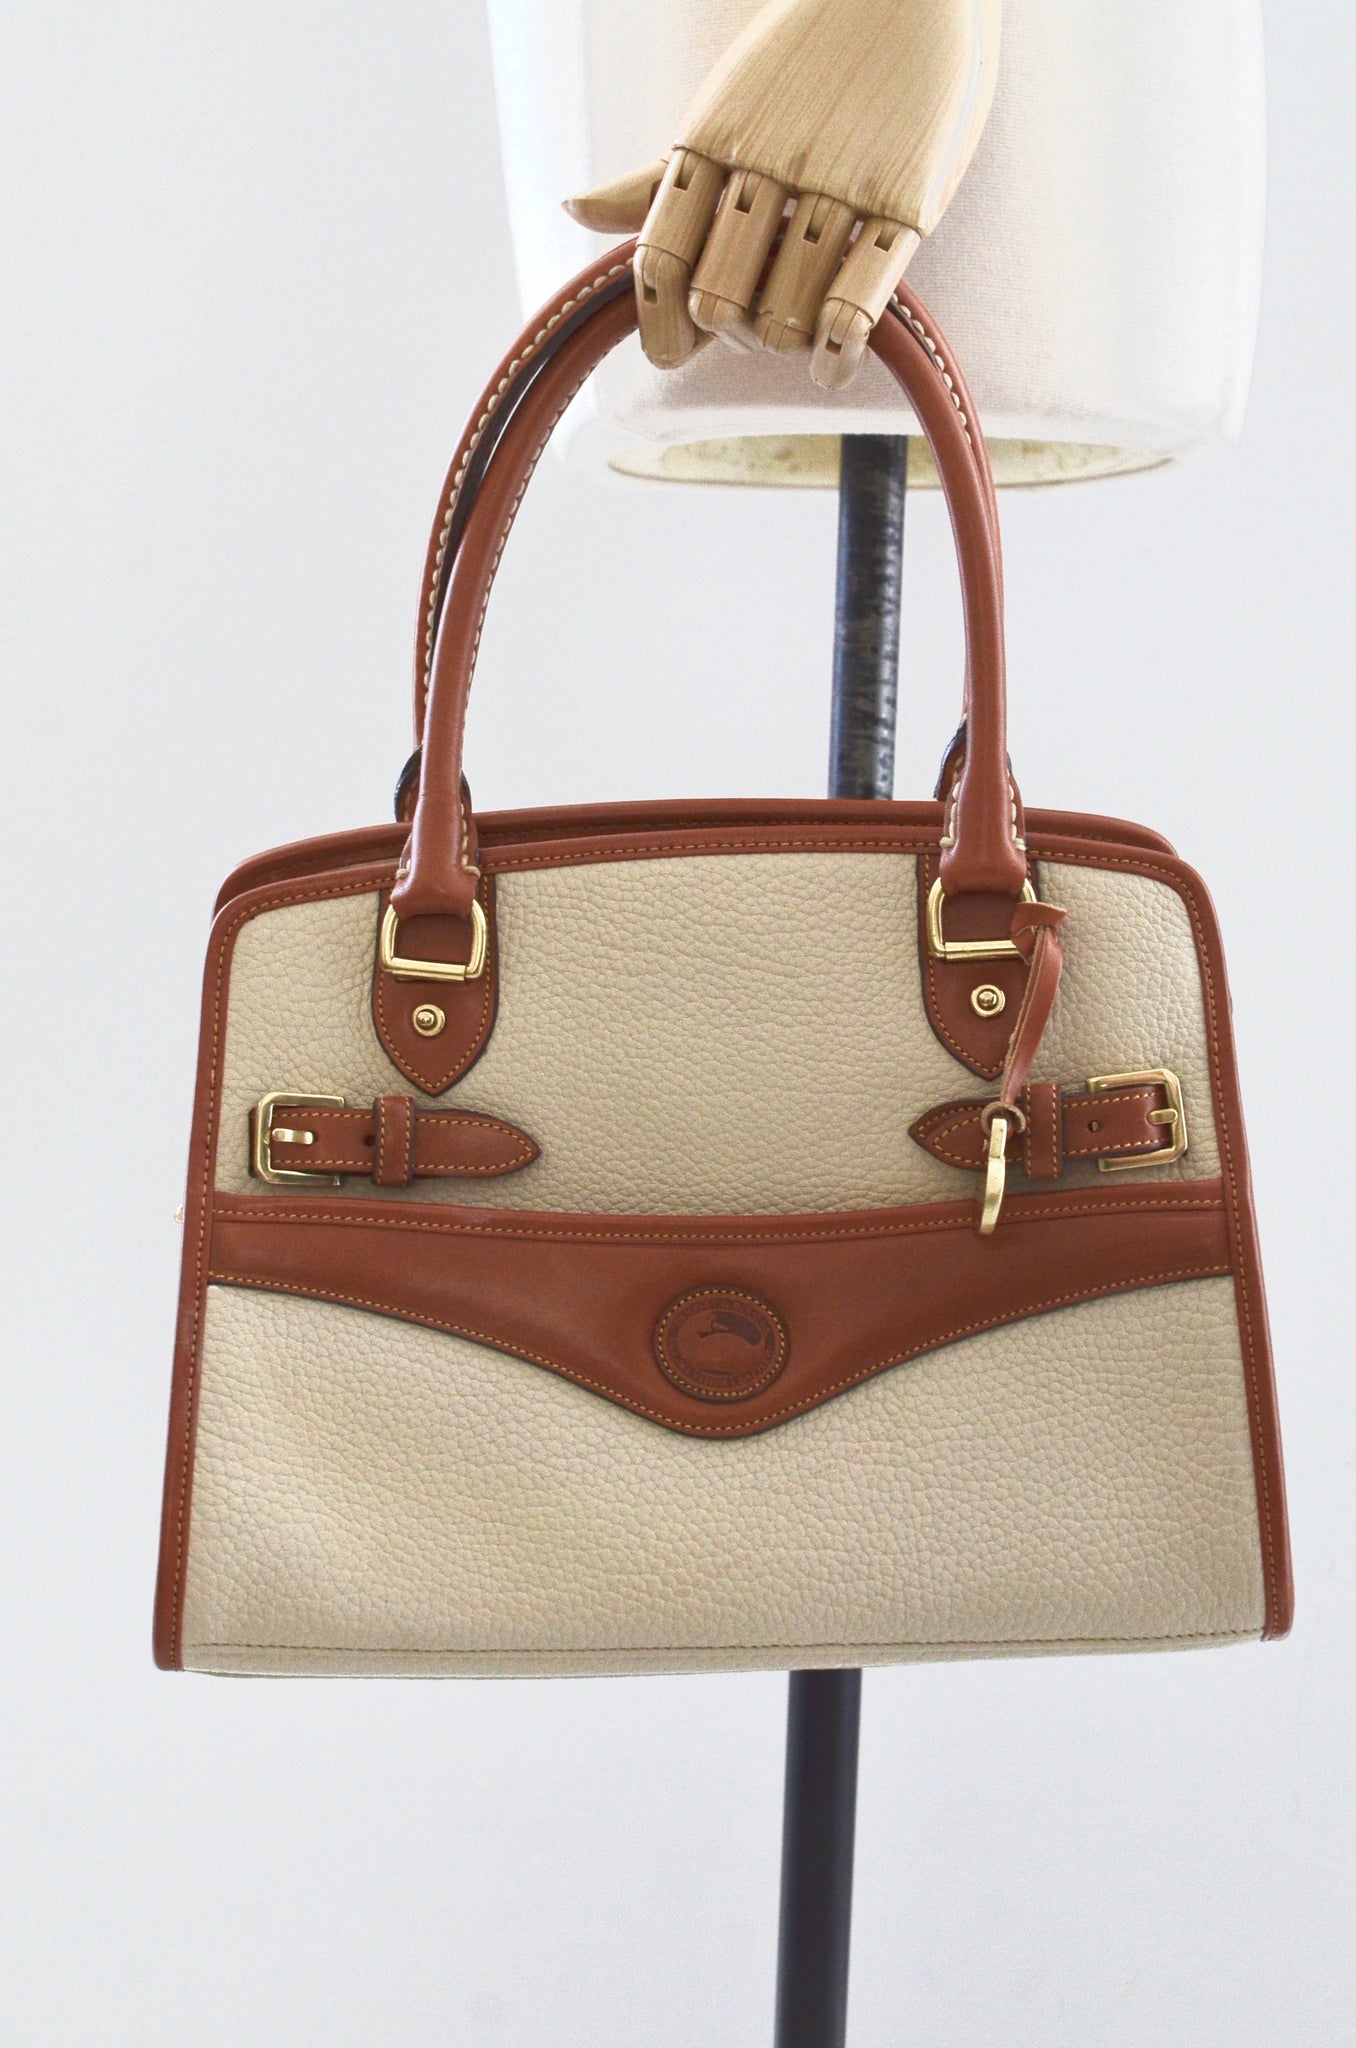 dooney and bourke all weather leather satchel